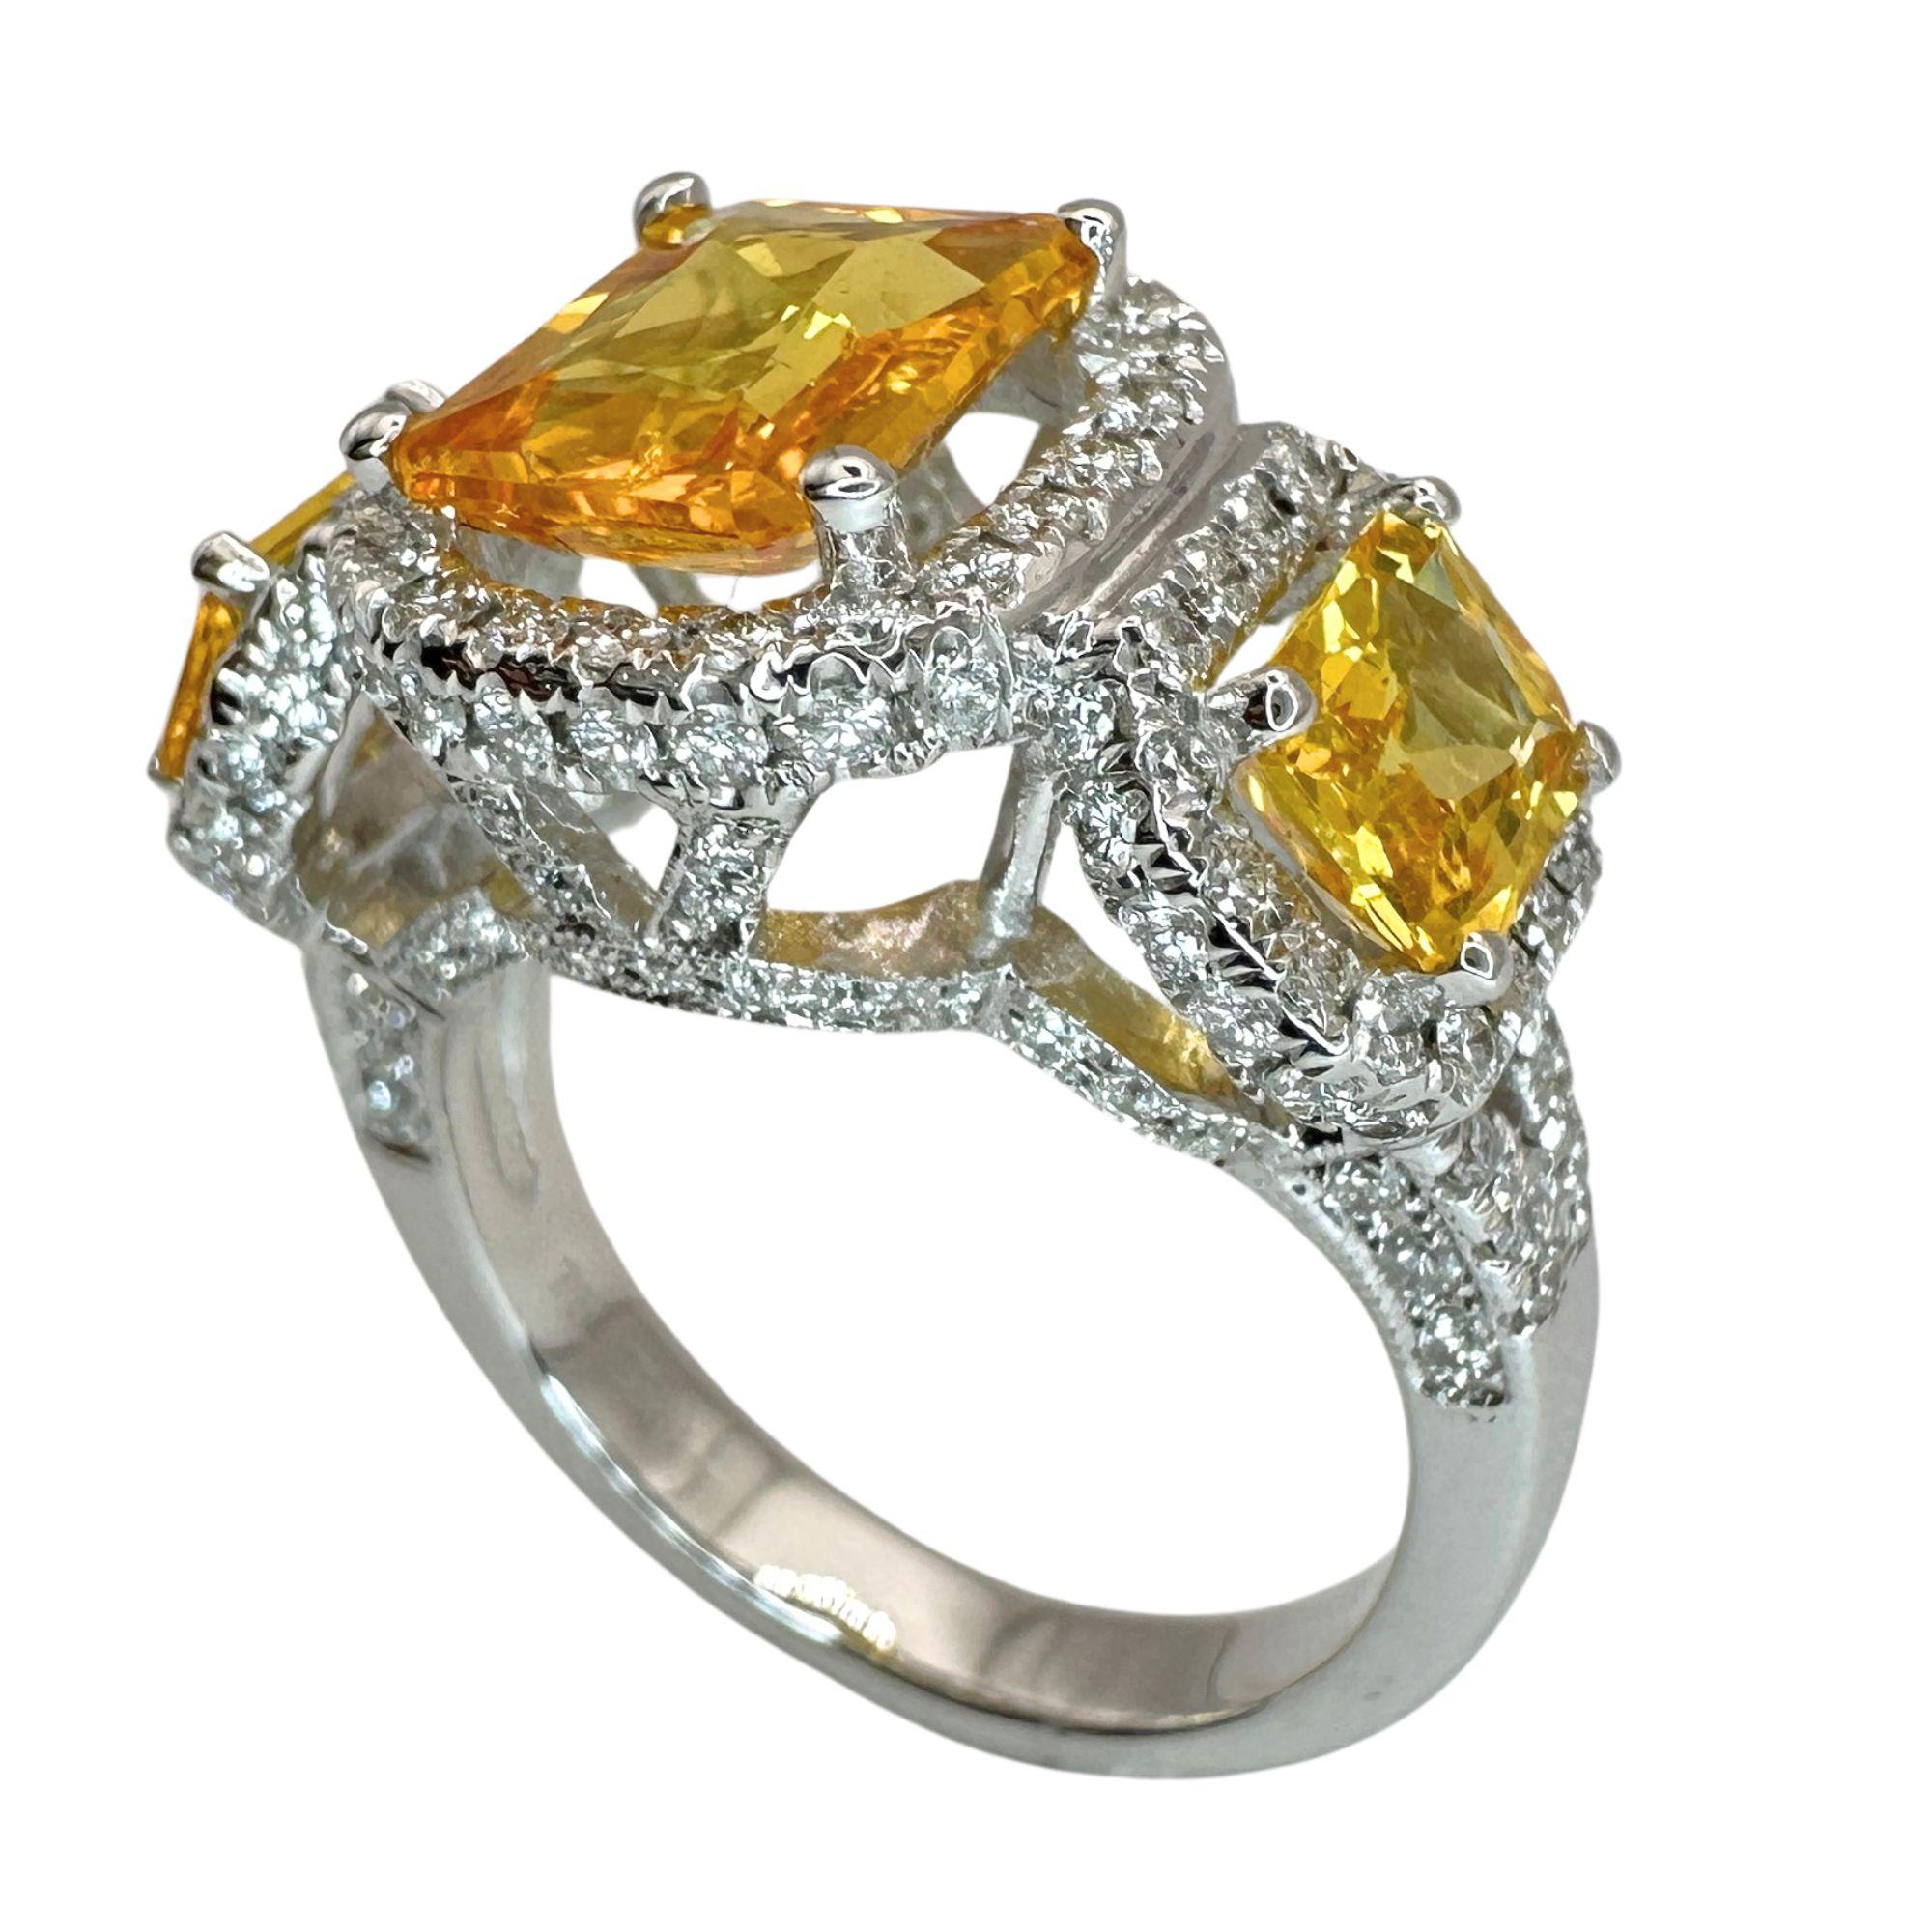 Elevate your style with our exquisite 18k Diamond and Yellow Sapphire Three Stone Ring. Crafted with 0.97 carats of sparkling diamonds and 3.95 carats of vibrant yellow sapphire, this ring is a true celebration of luxury and elegance. In good